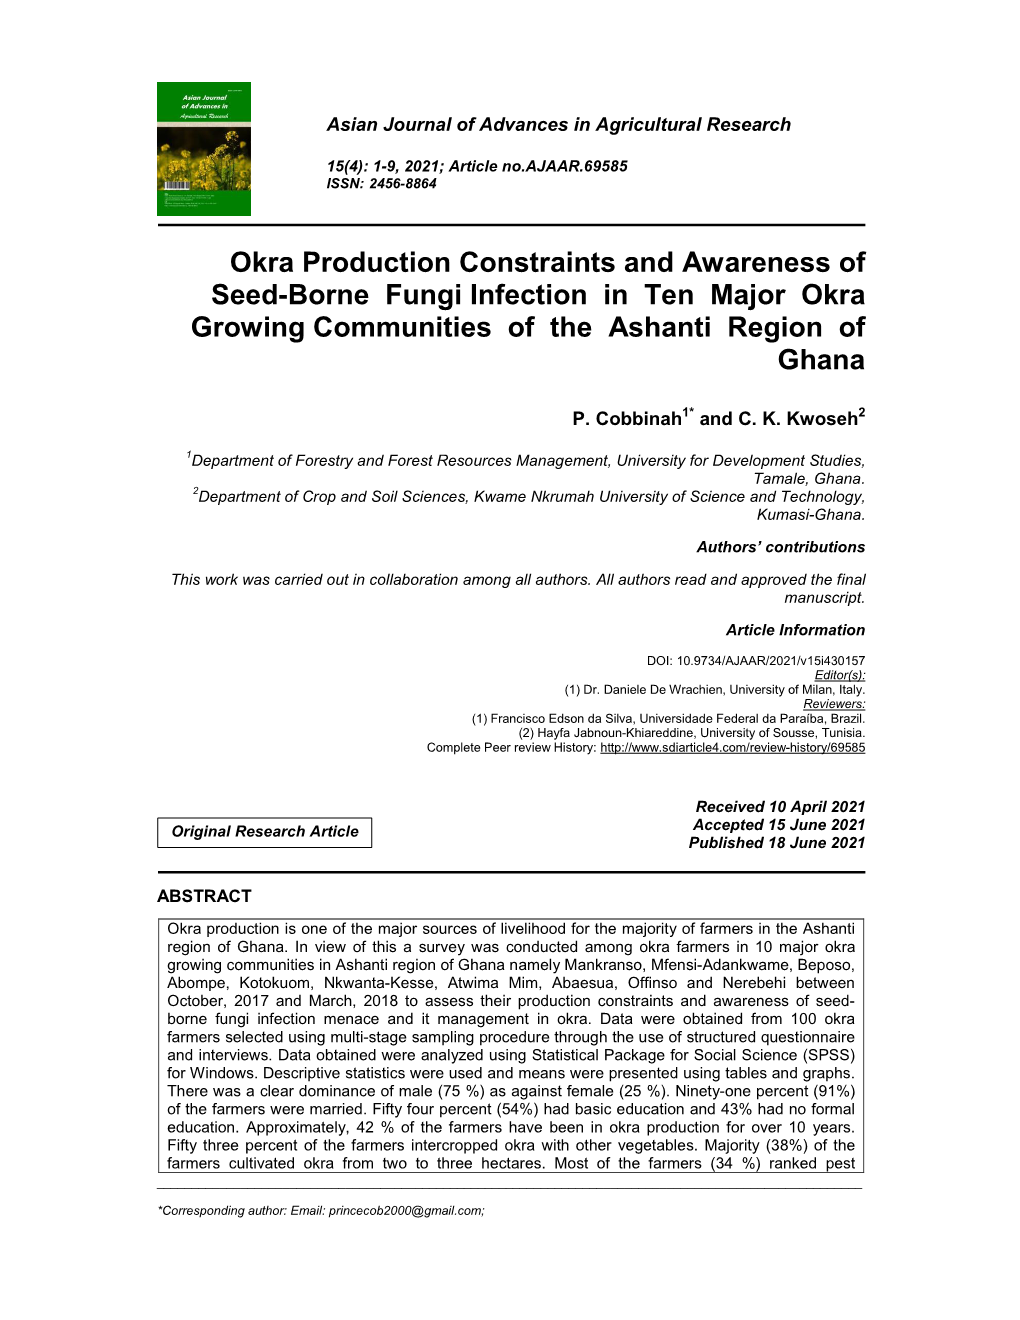 Okra Production Constraints and Awareness of Seed-Borne Fungi Infection in Ten Major Okra Growing Communities of the Ashanti Region of Ghana